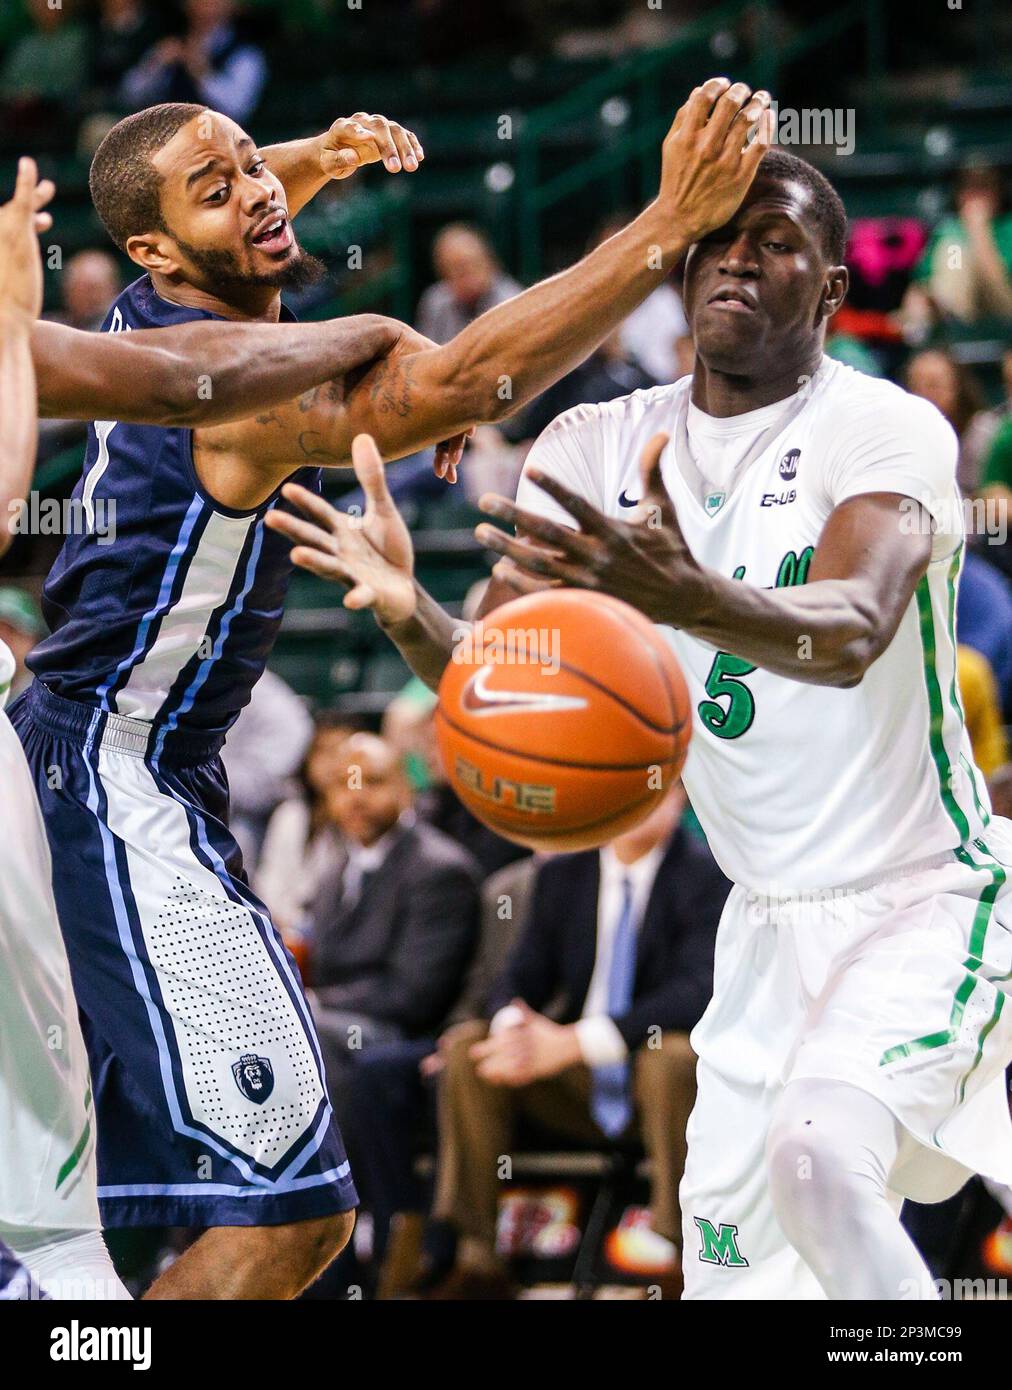 Marshall's Cheikh Sane (5) and Old Dominion's Aaron Bacote (1) fight for a  loose ball during an NCAA college basketball game Thursday, Jan. 8, 2015,  at the Cam Henderson Center in Huntington,